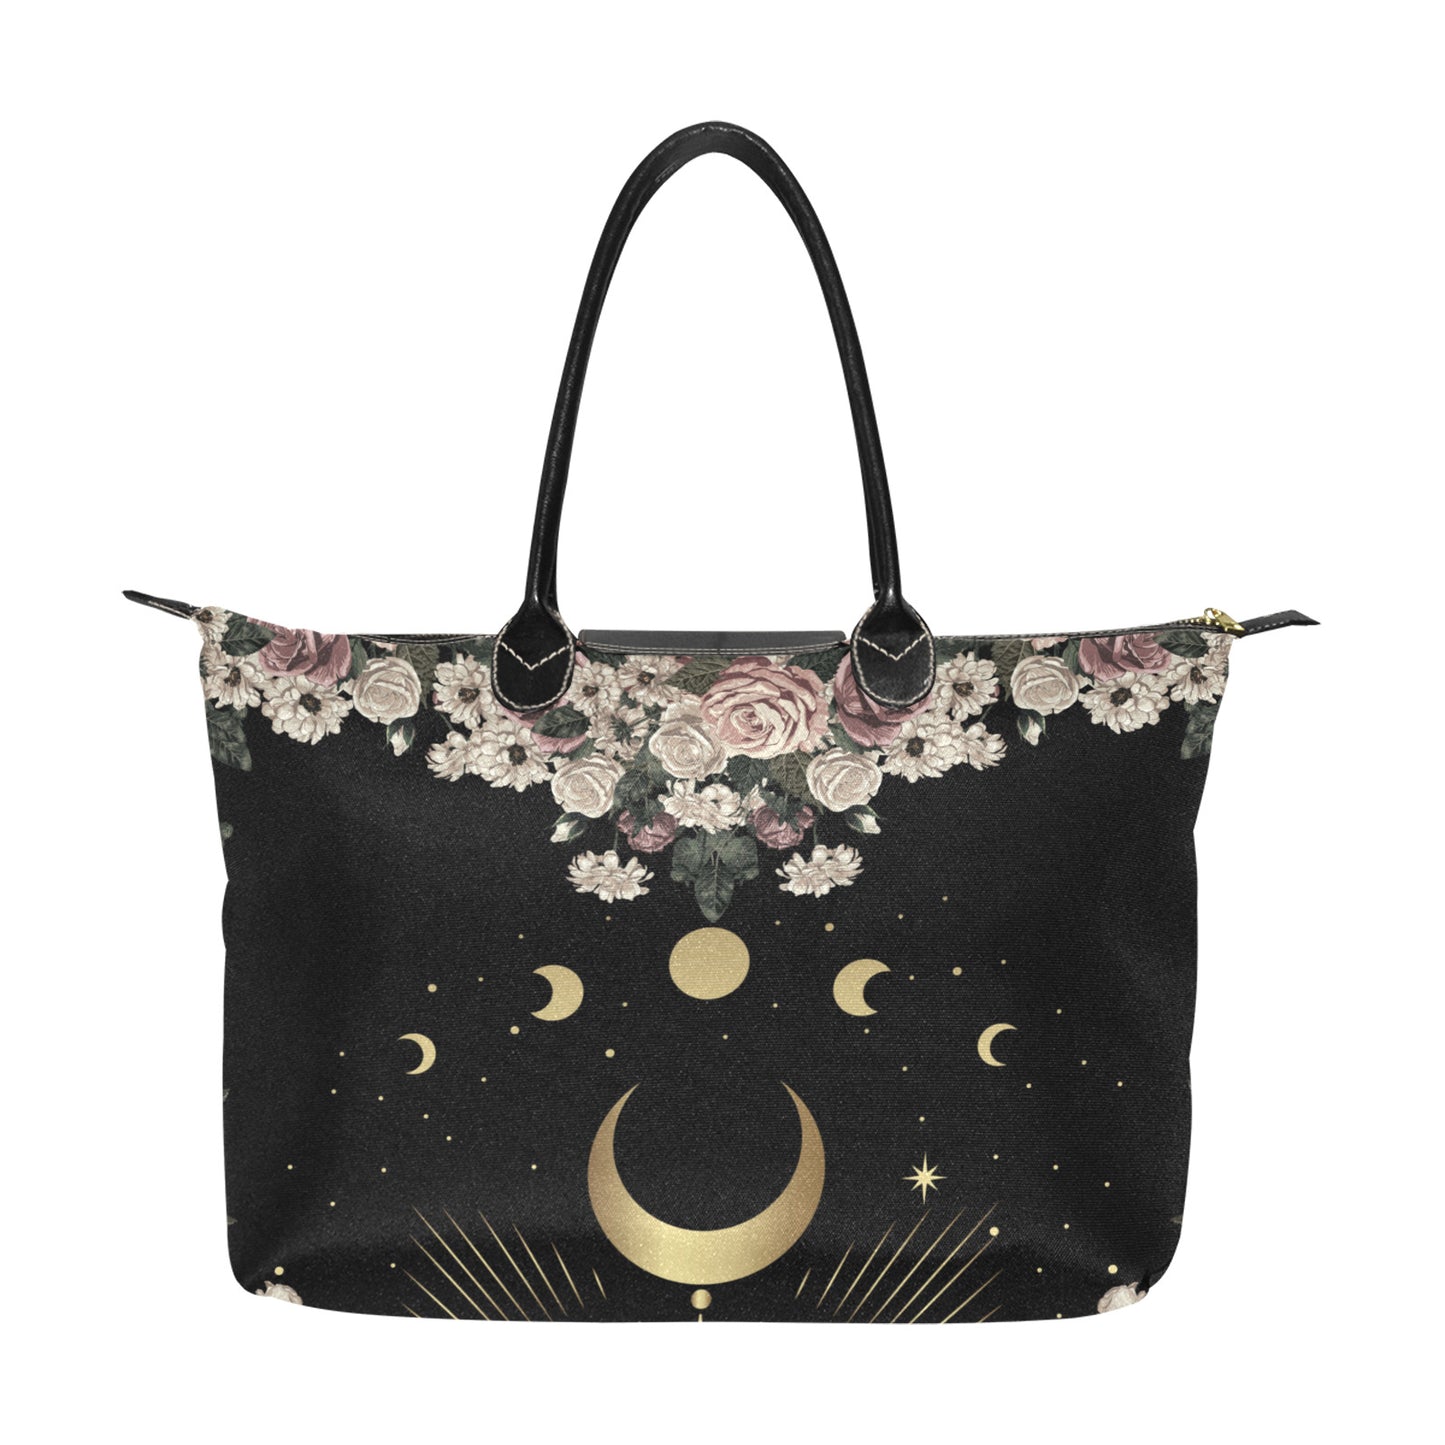 Pale rose moon phase Witch zip tote Women's Classic Handbag